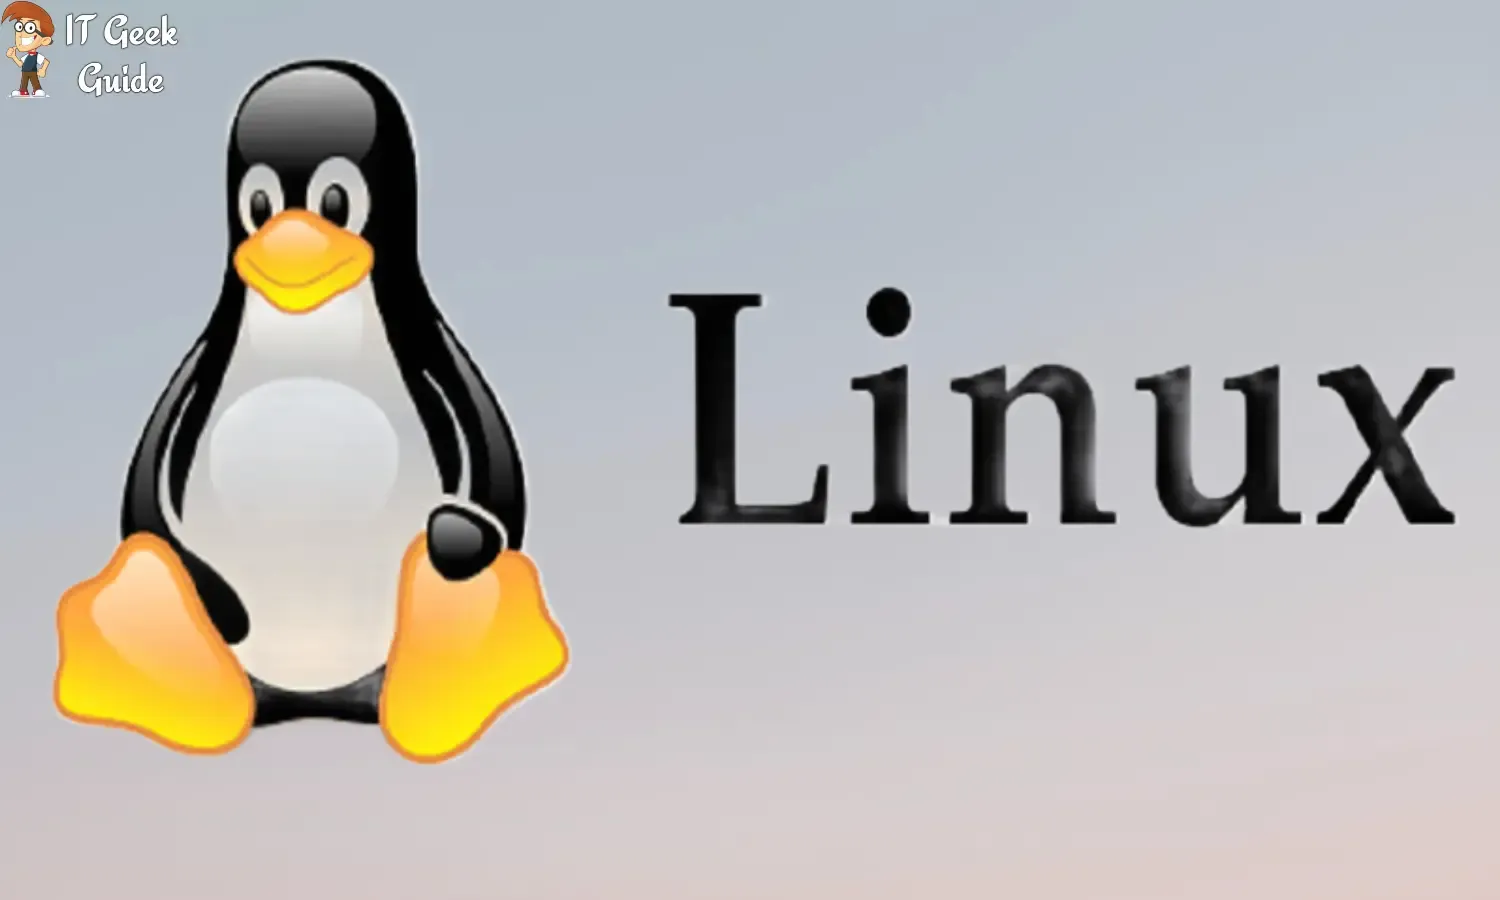 Why would someone want to use Linux?